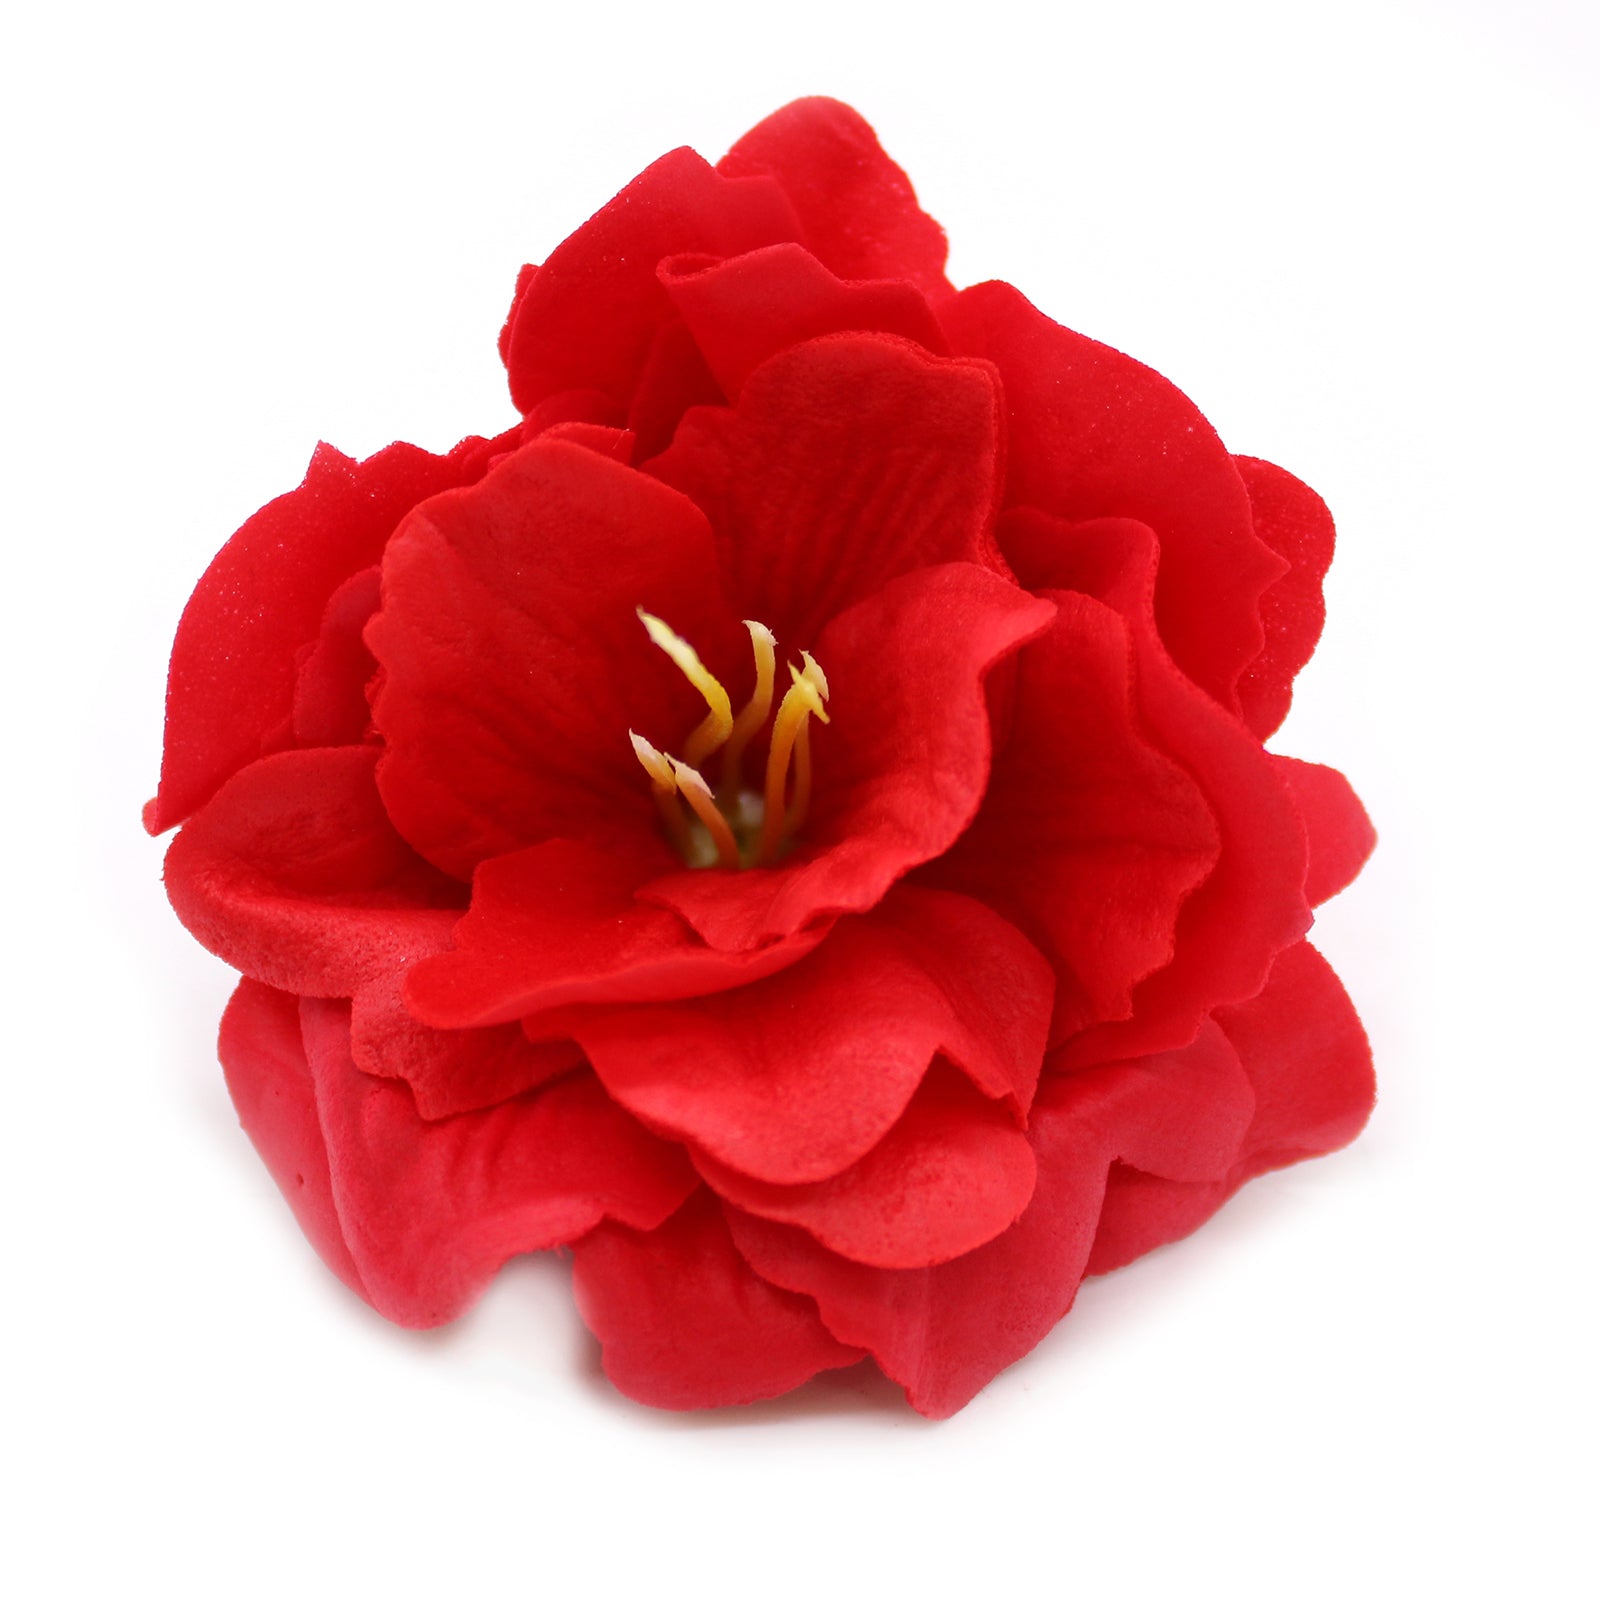 View Craft Soap Flower Small Peony Red information